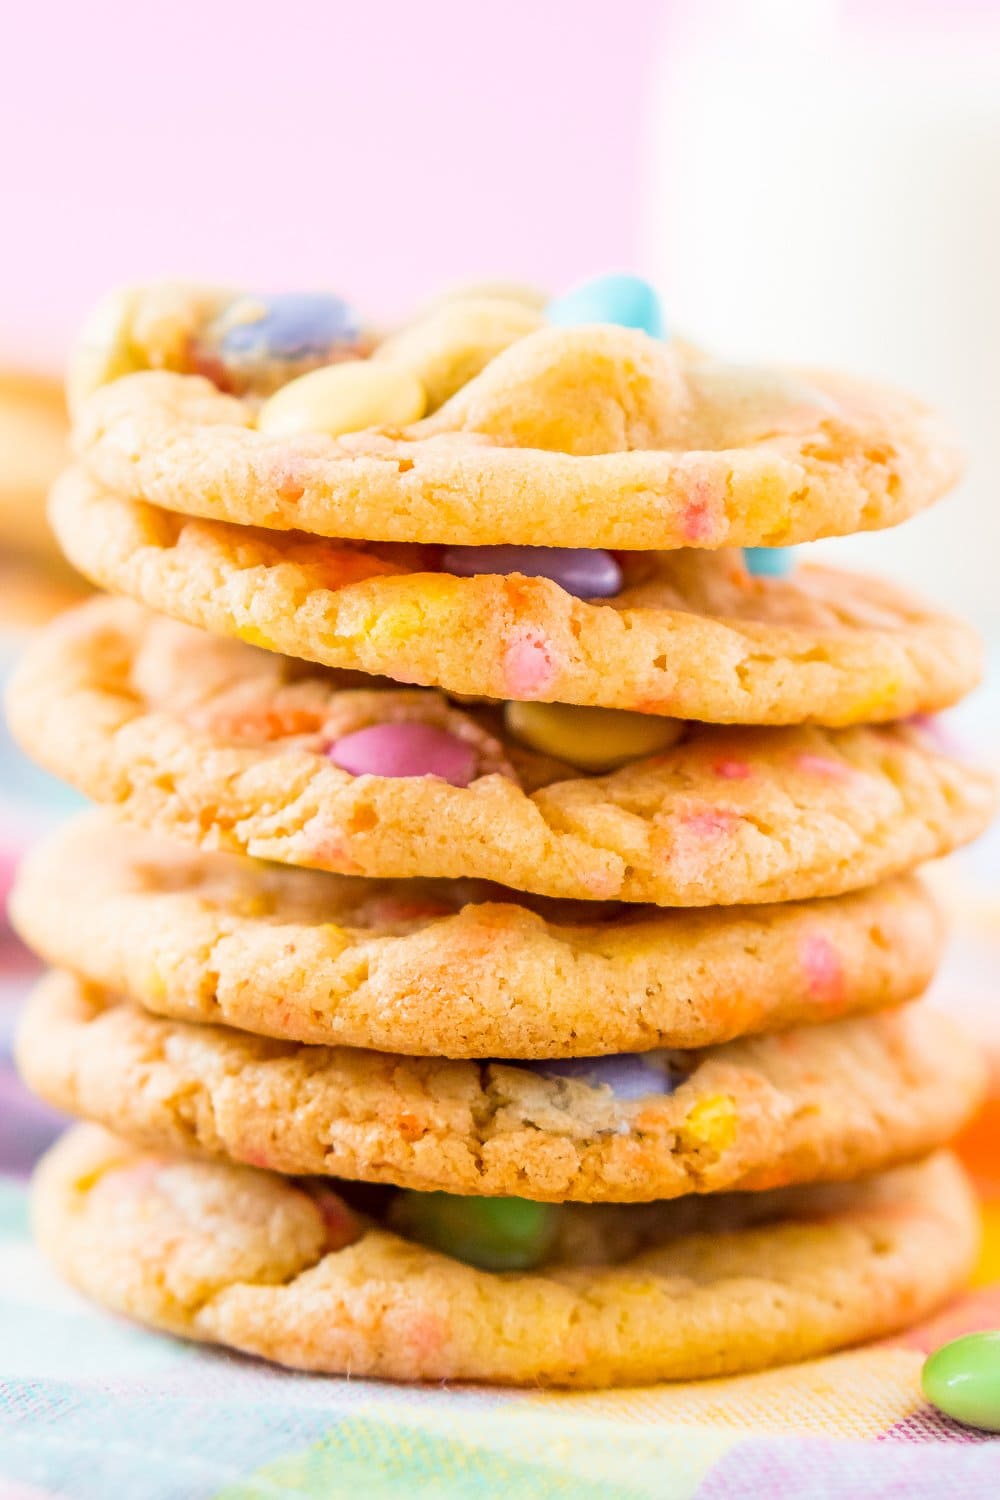 A stack of cookies full of pastel colored sprinkles and m&ms